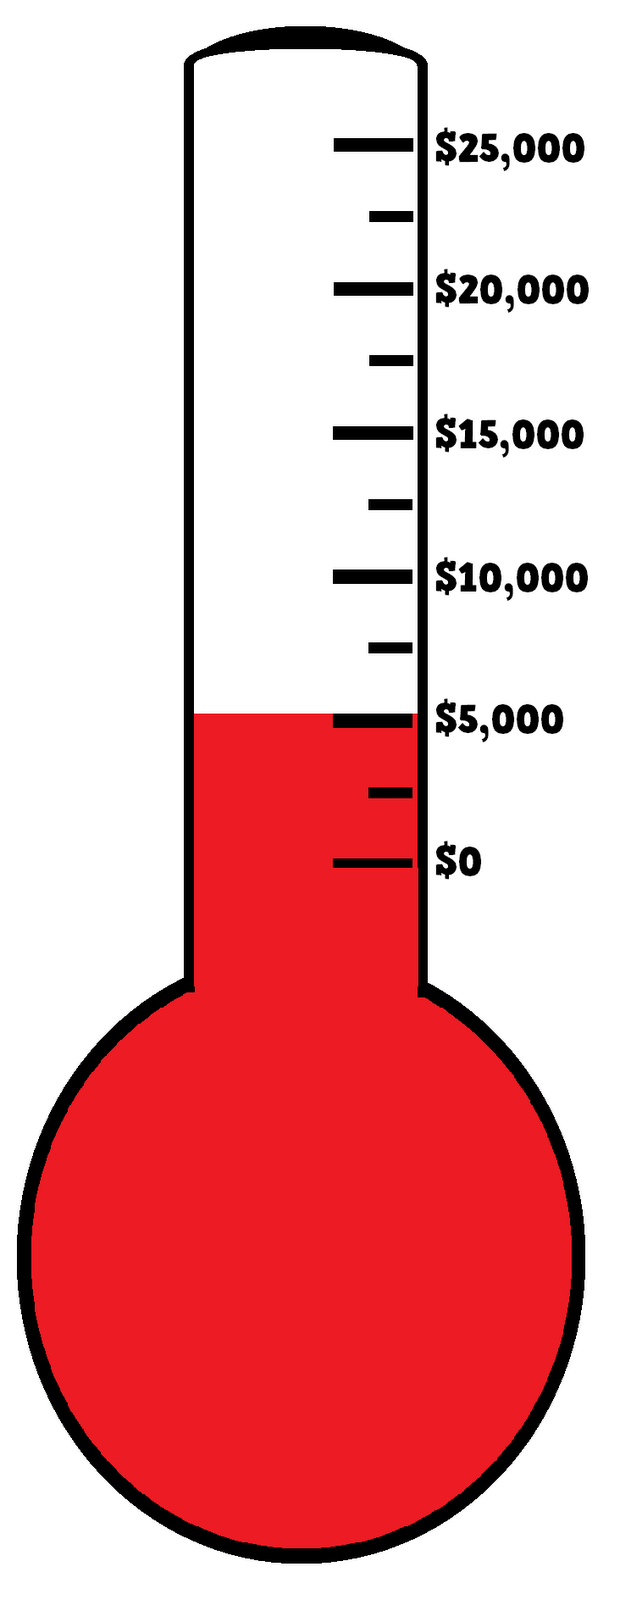 Free Fundraising Goal Thermometer Template